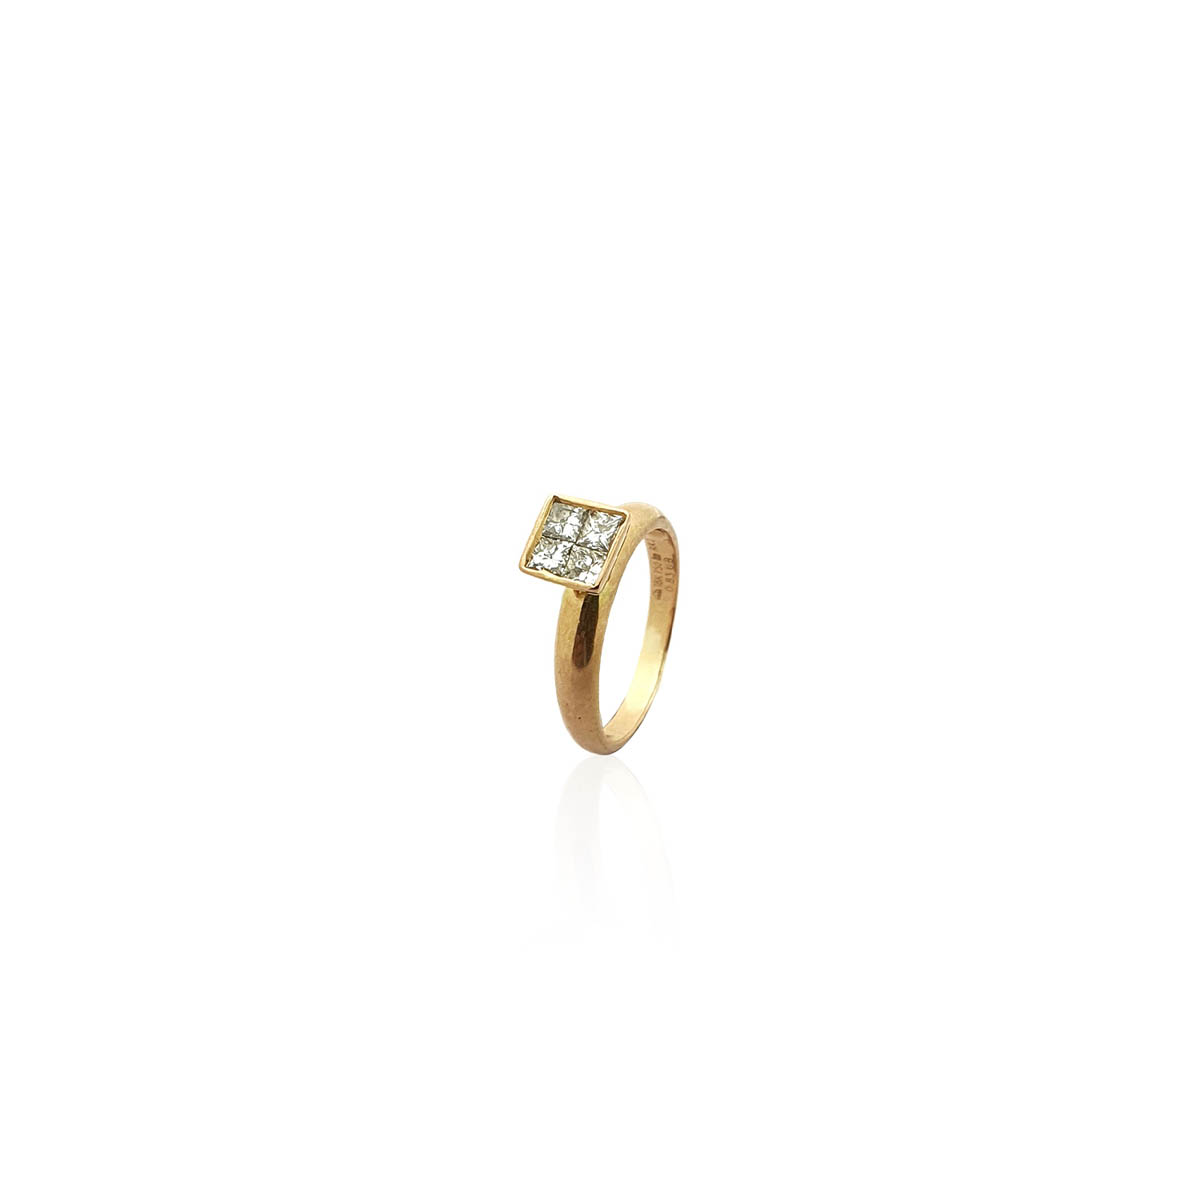 Square Shaped Engagement Rings | Collins Diamonds